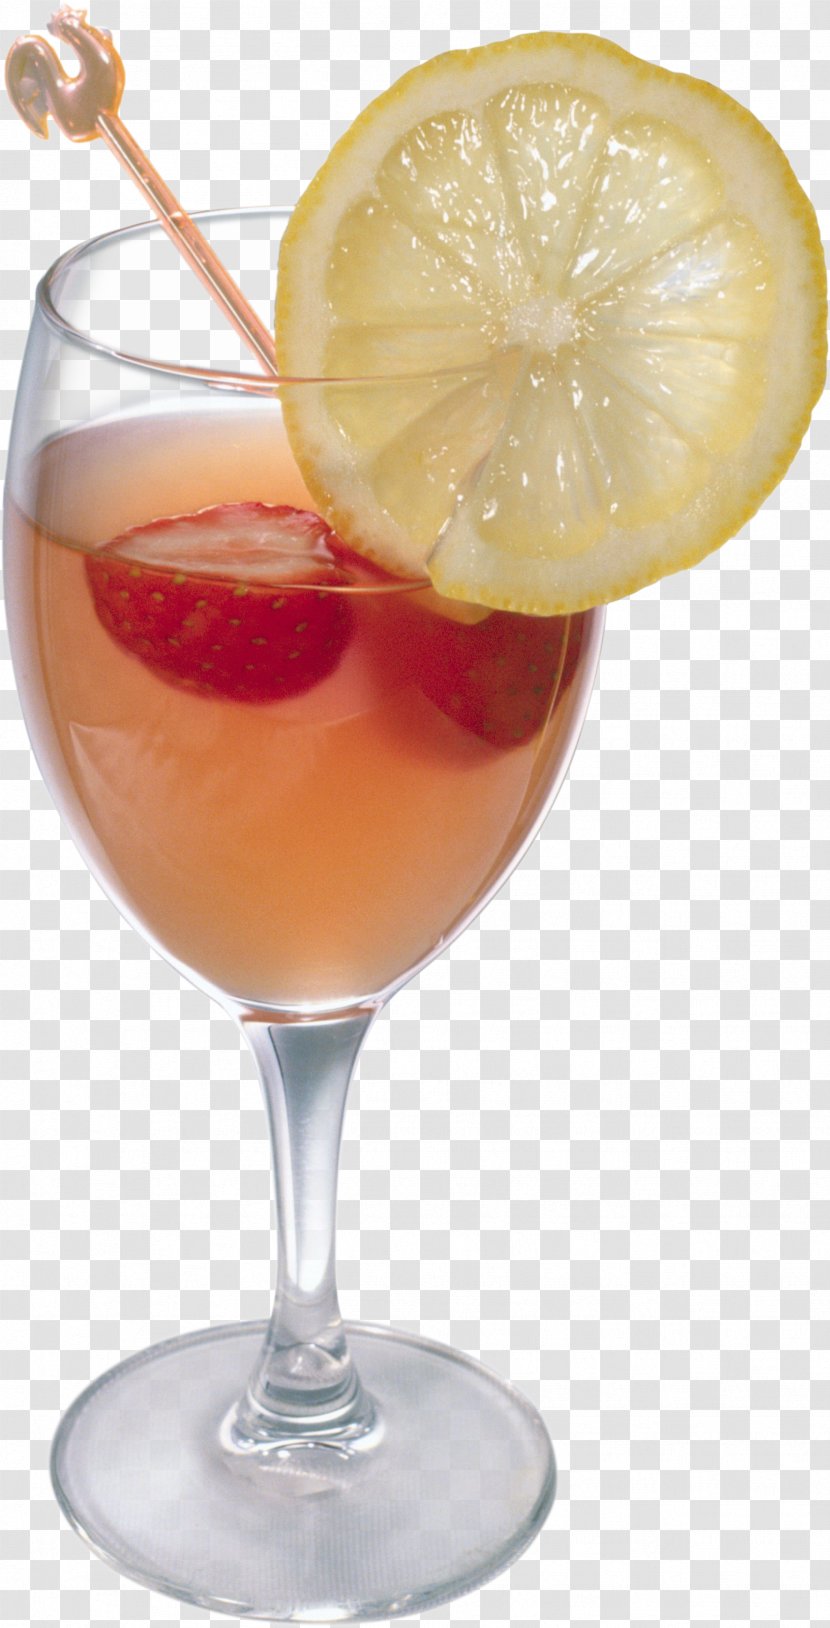 Wine Glass Drink Breakfast - Animation - Cocktail Transparent PNG